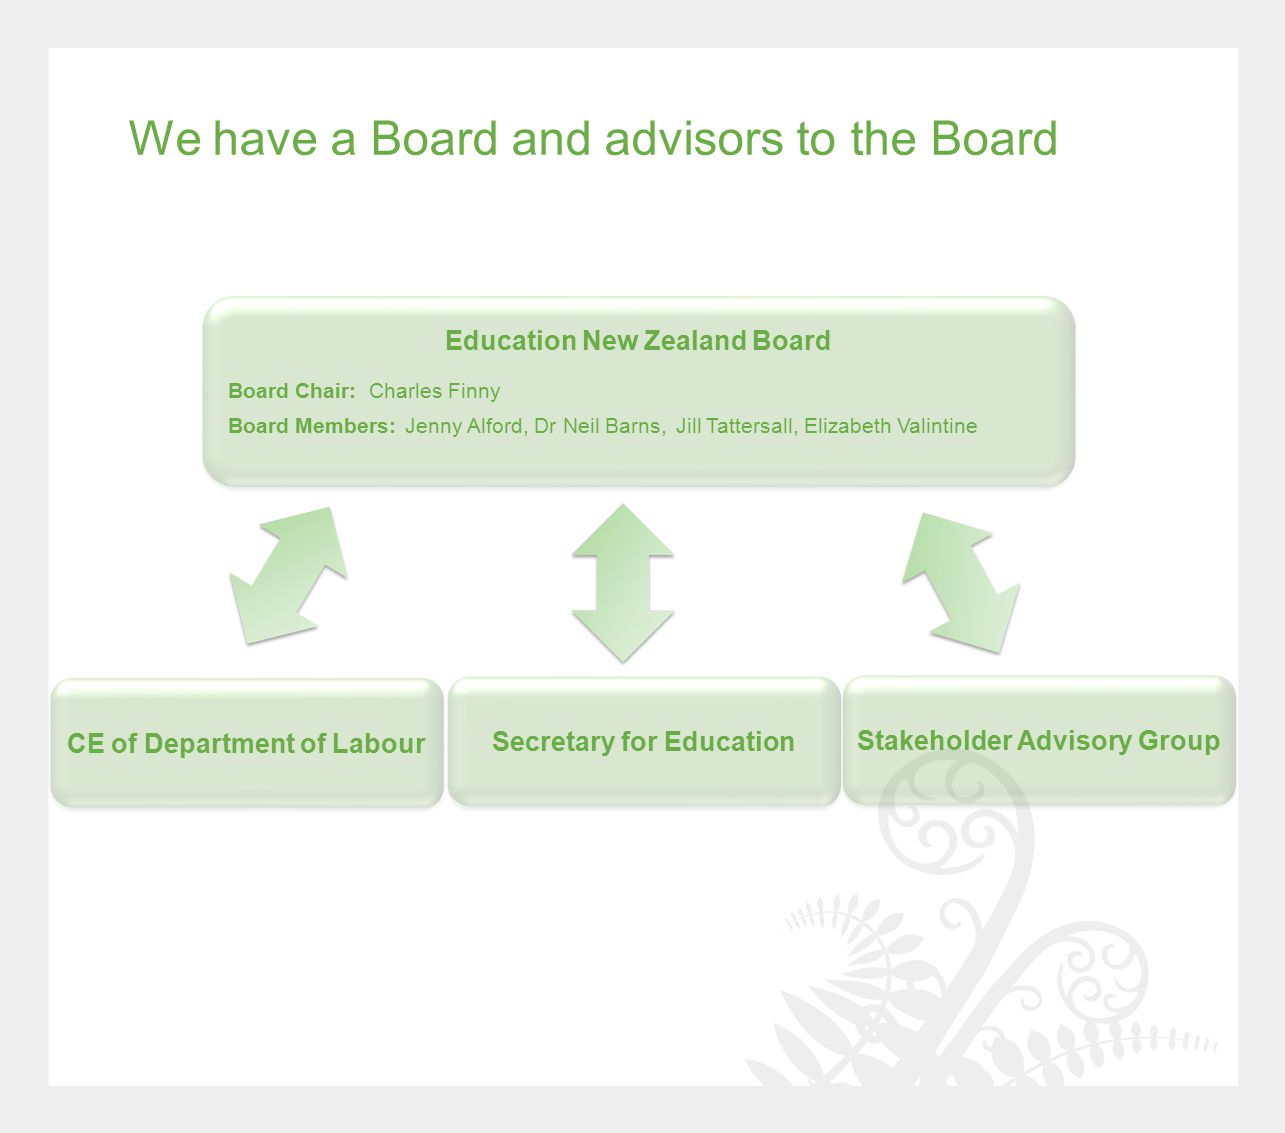 We have a Board and advisors to the Board Education New Zealand Board Stakeholder Advisory Group Secretary for Education CE of Department of Labour Board Chair: Charles Finny Board Members: Jenny Alford, Dr Neil Barns, Jill Tattersall, Elizabeth Valintine